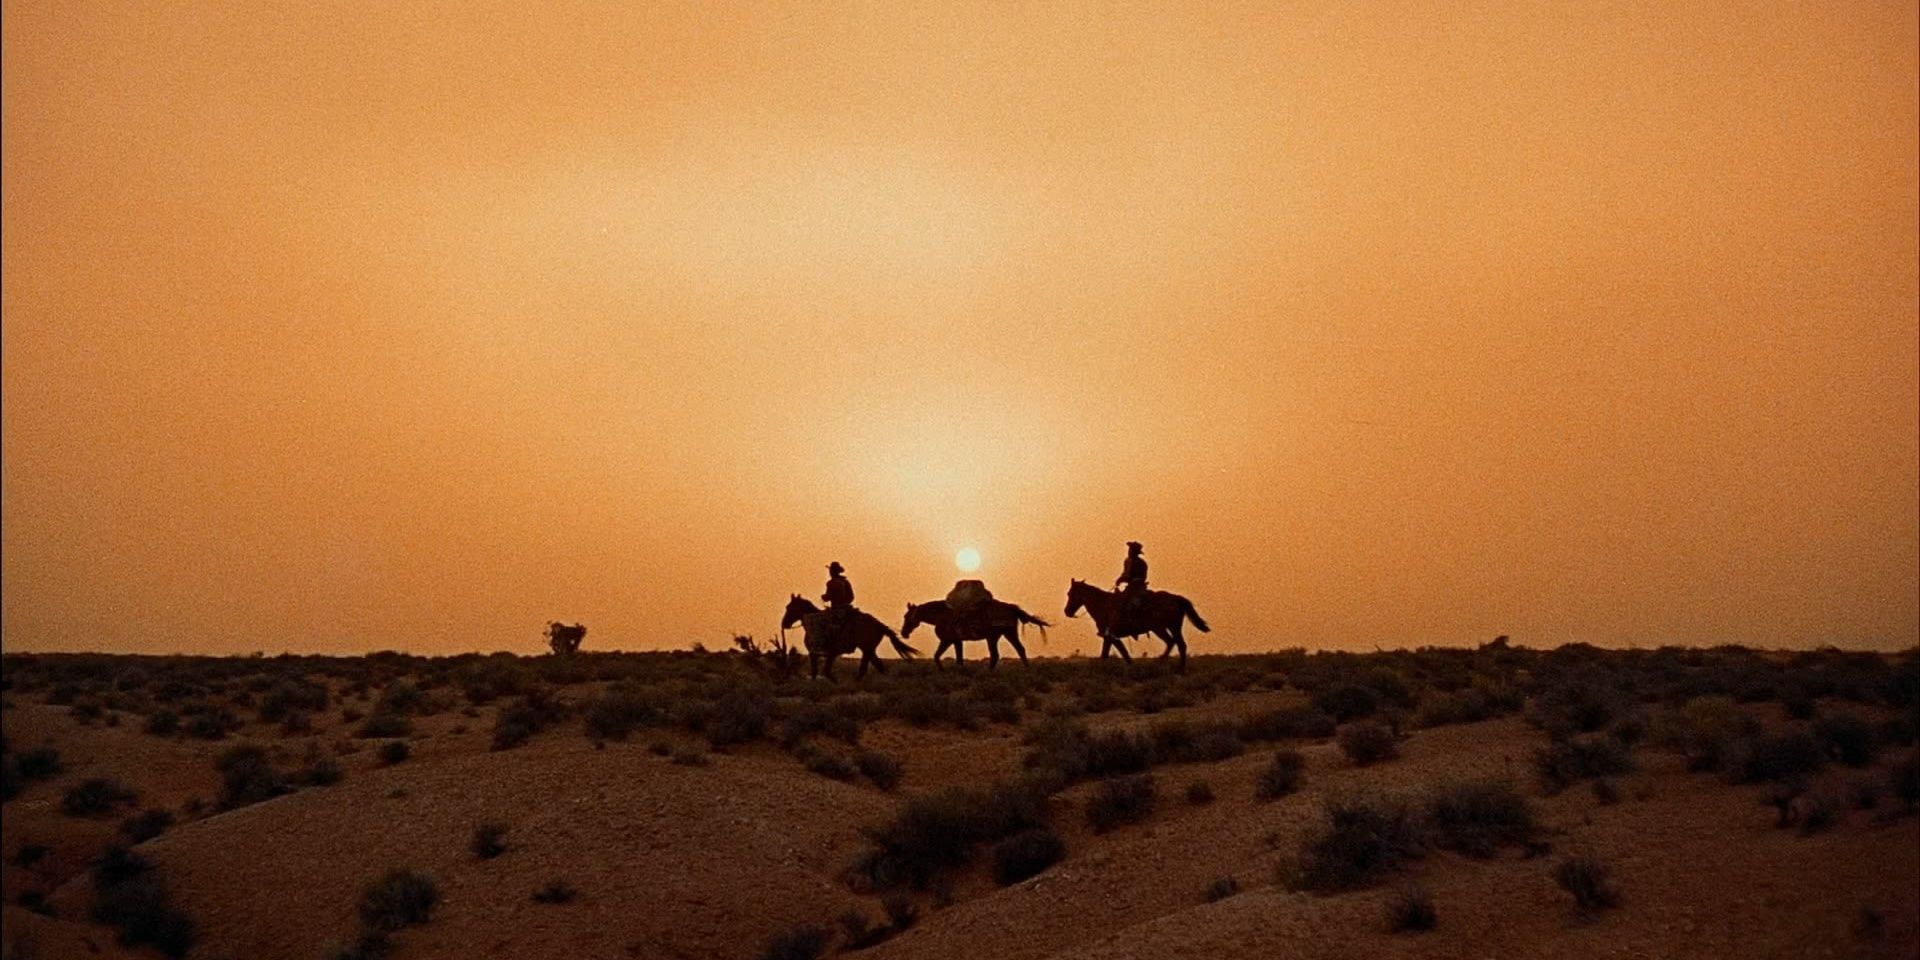 Silhouette of cowboys on horses in The Searchers